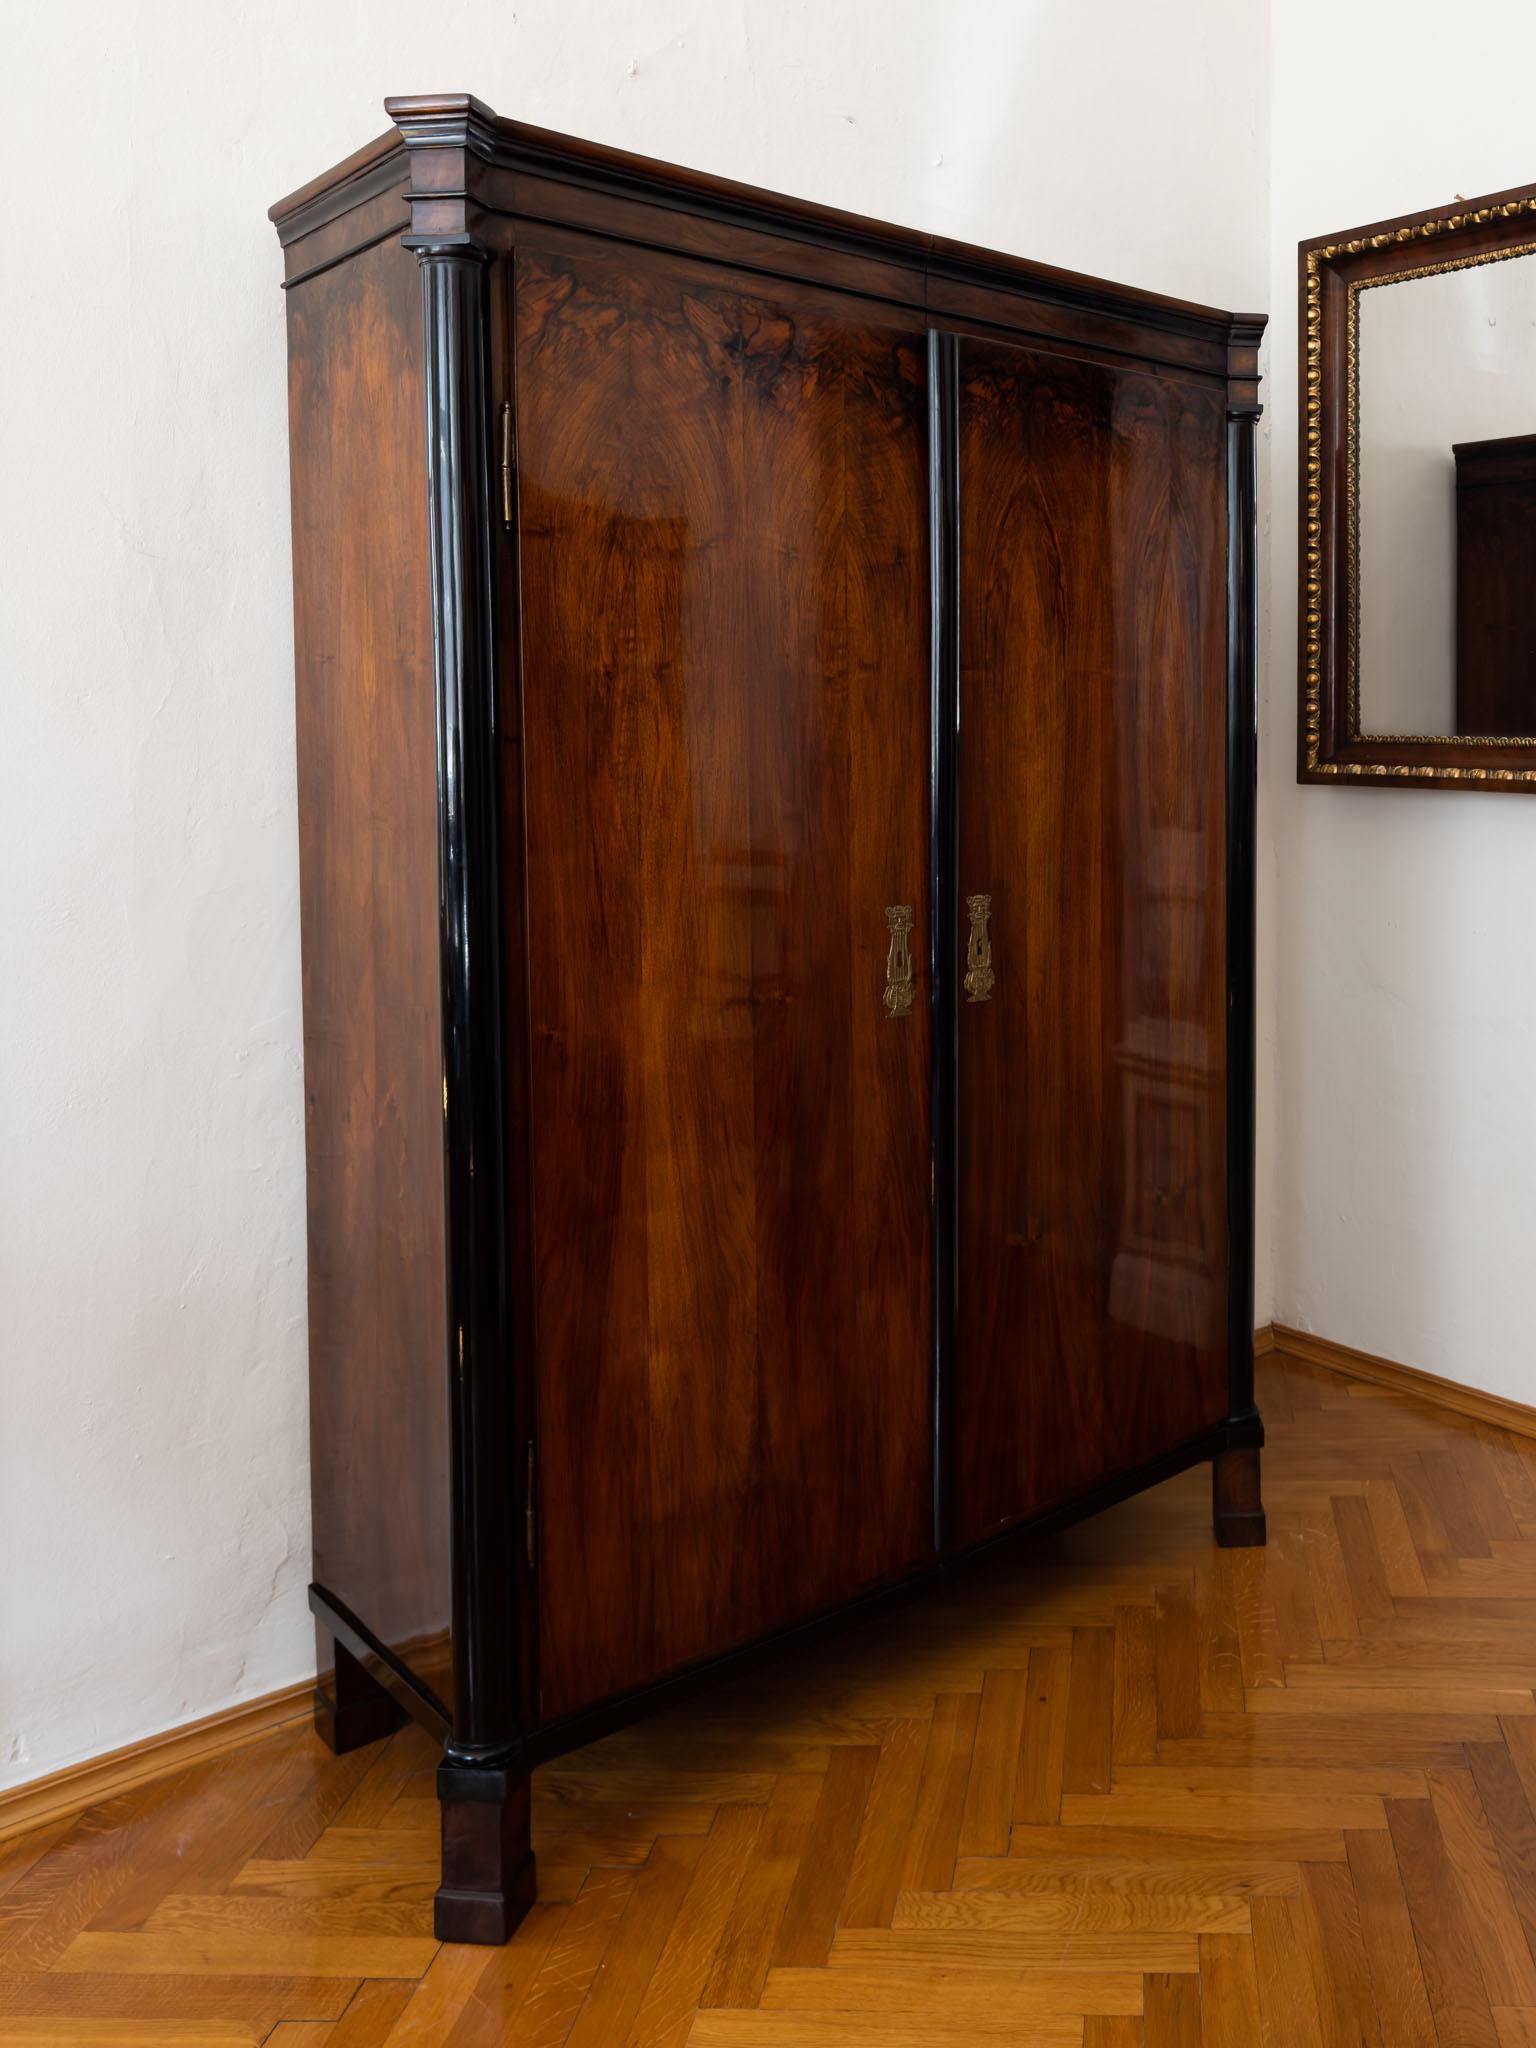 Two-door wardrobe with profiled cornice and ebonised columns. The corners of the wardrobe are cranked and rest on socketed square feet. Very beautiful walnut veneer on the front. The interior division consists of a clothes rail with one shelf.